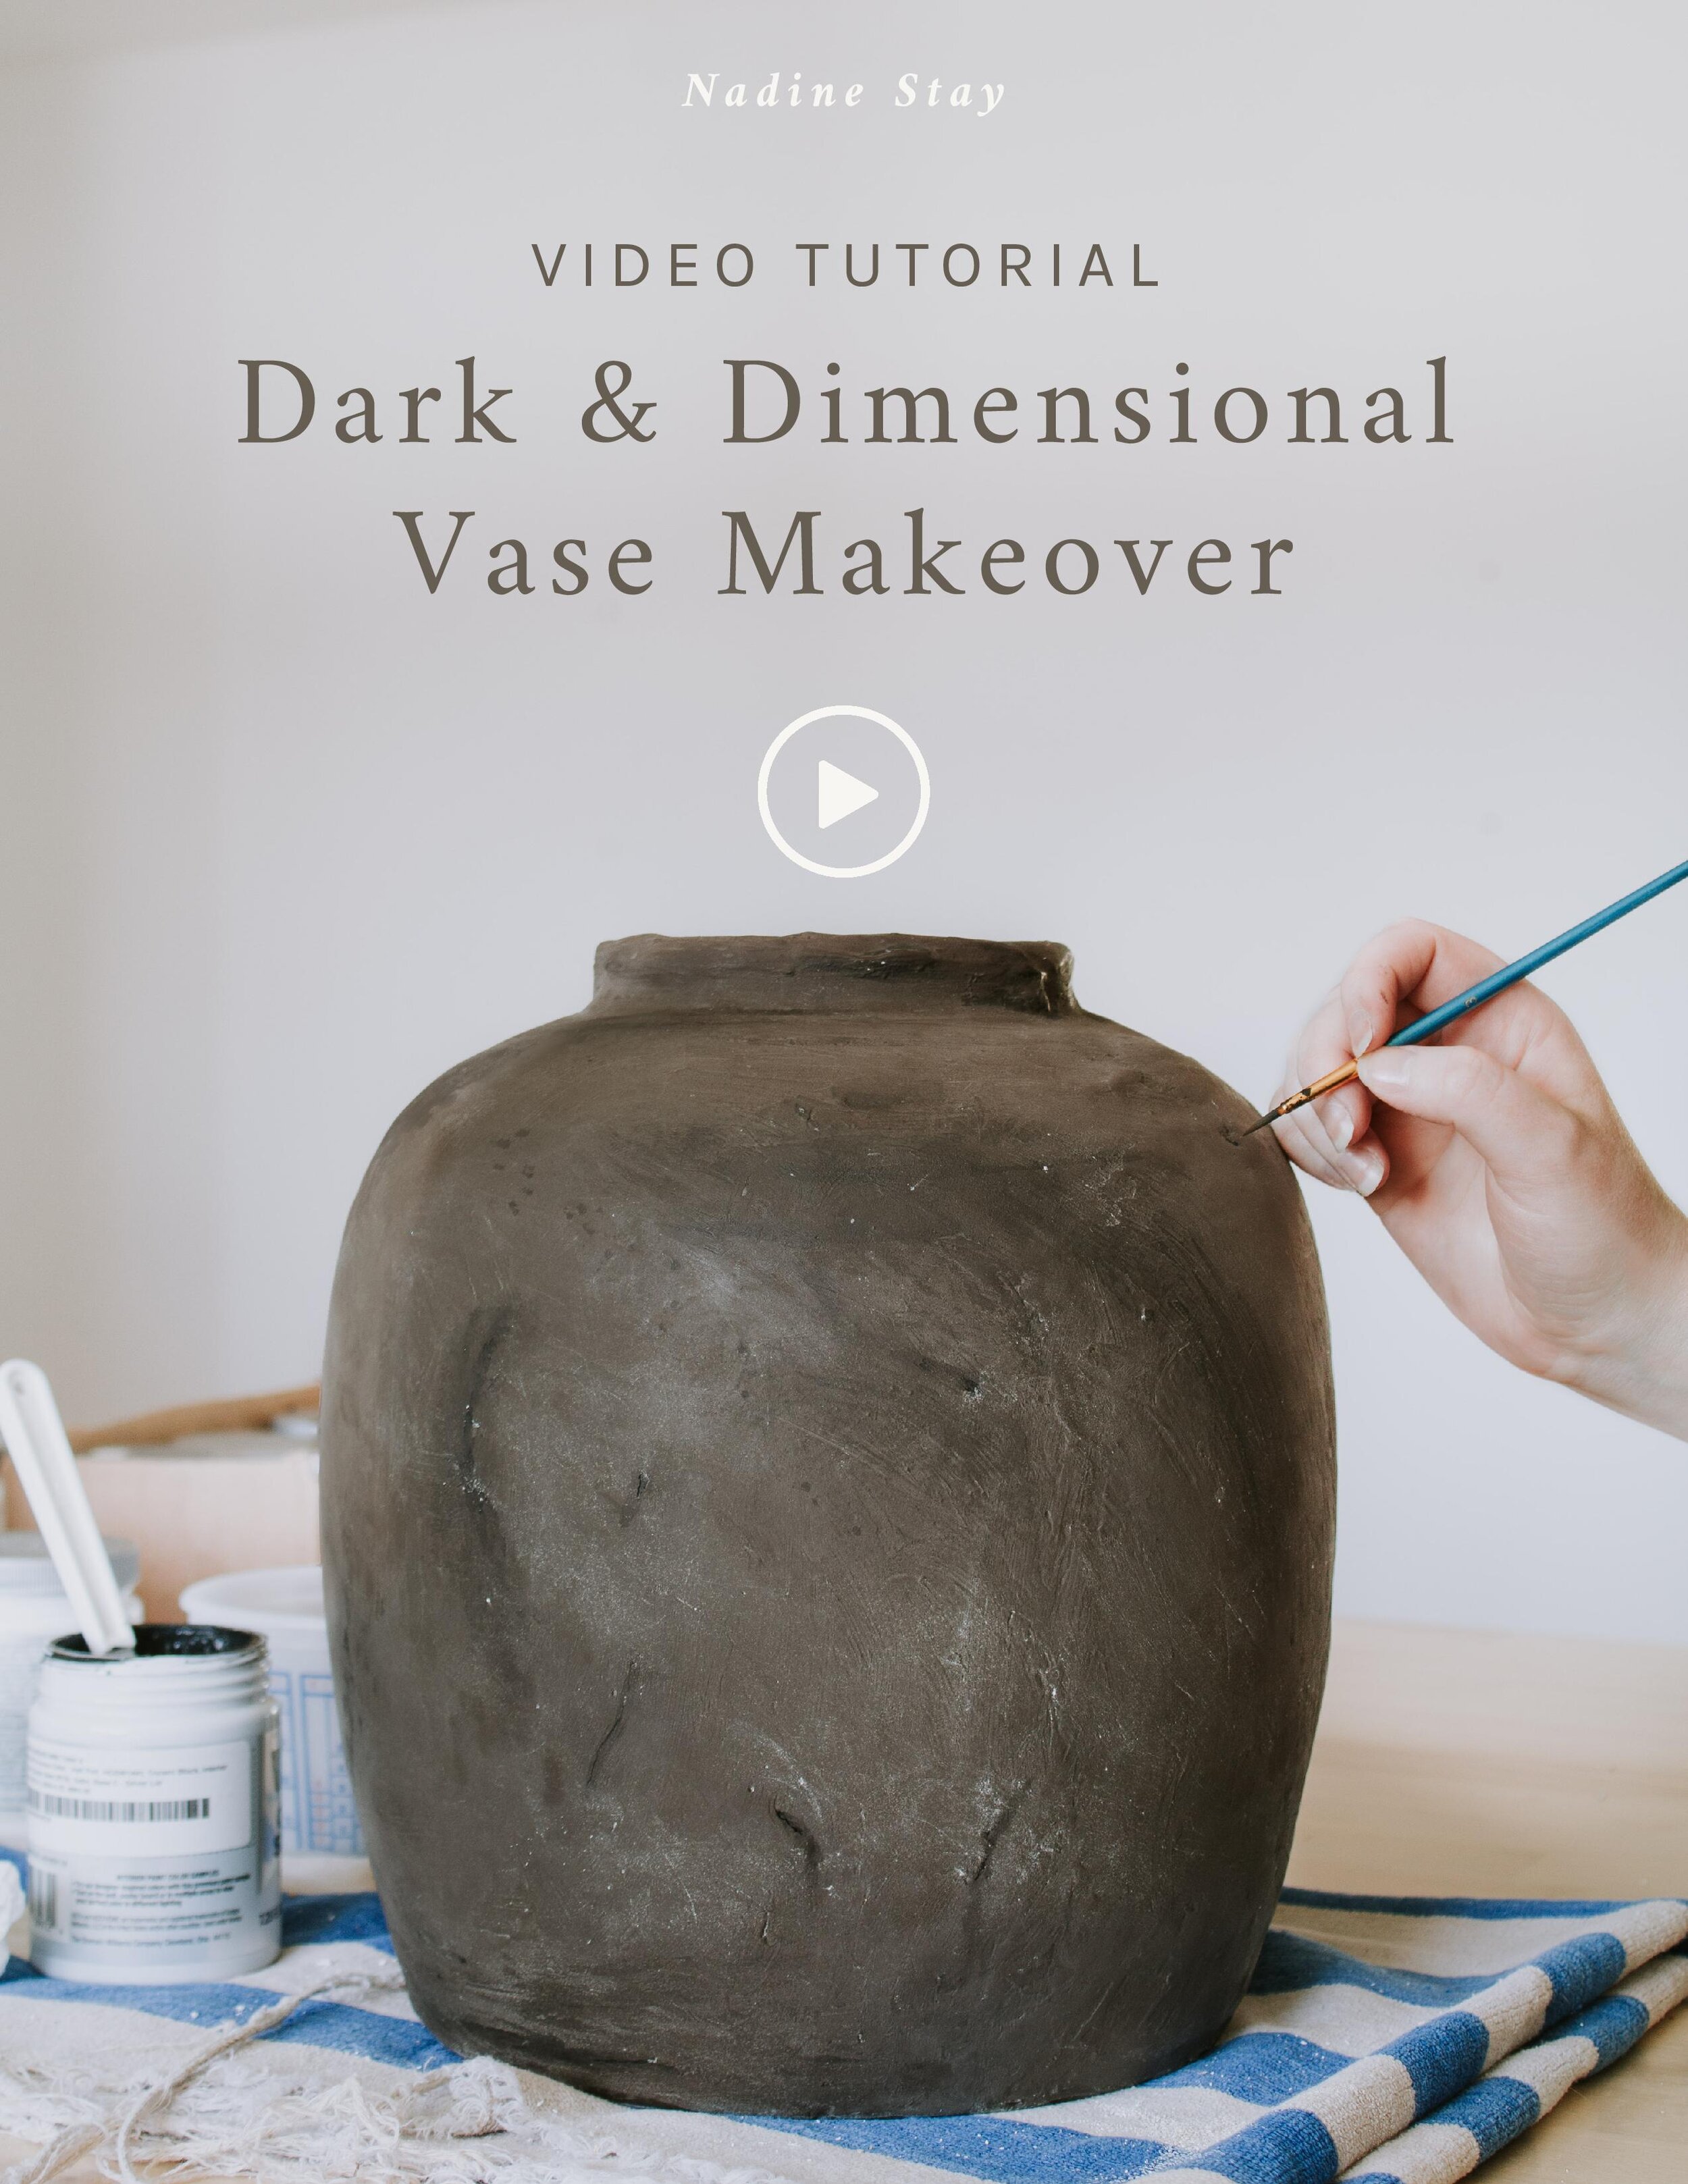 DIY Dark & Dimensional Aged Old World Pottery Makeover & Video Tutorial - How to make thrifted vases look old and vintage. Thrifted vase makeover with plaster and brown layered paint. Vase Makeover by Nadine Stay.